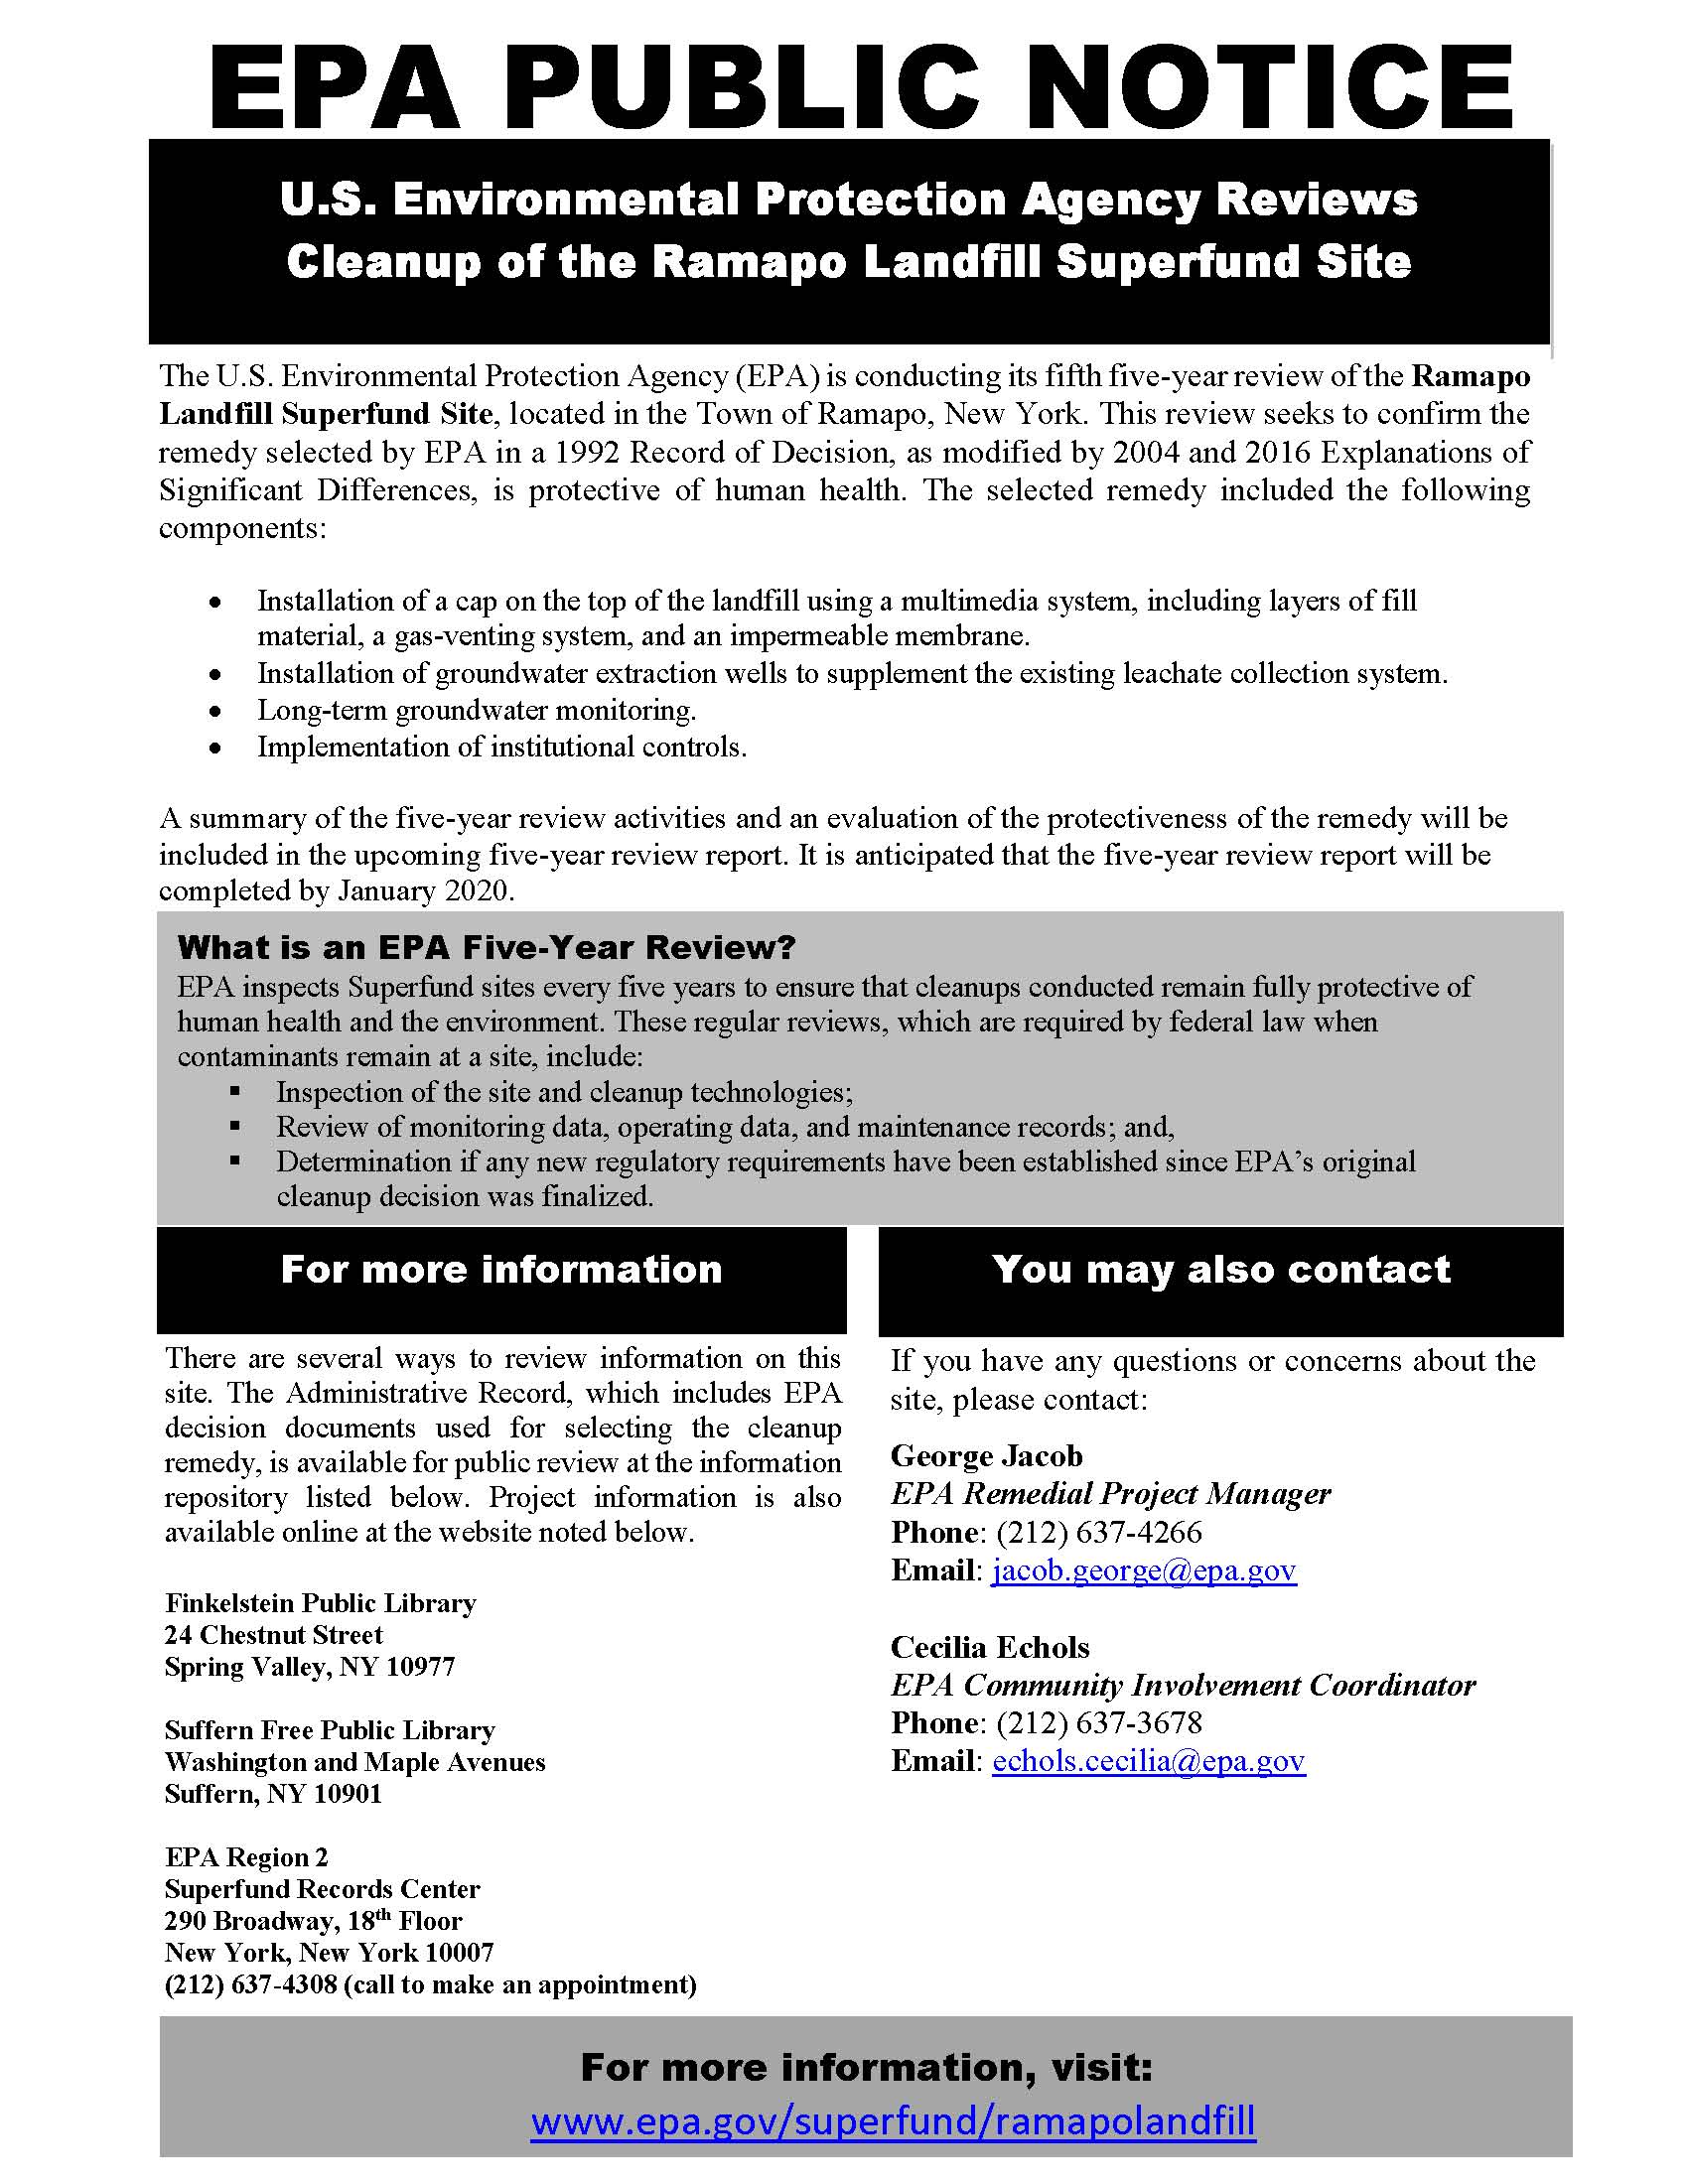 Uploaded Image: /uploads/public-notices/Ramapo Fifth five year review public notice_final_12.2.19  (002).jpg